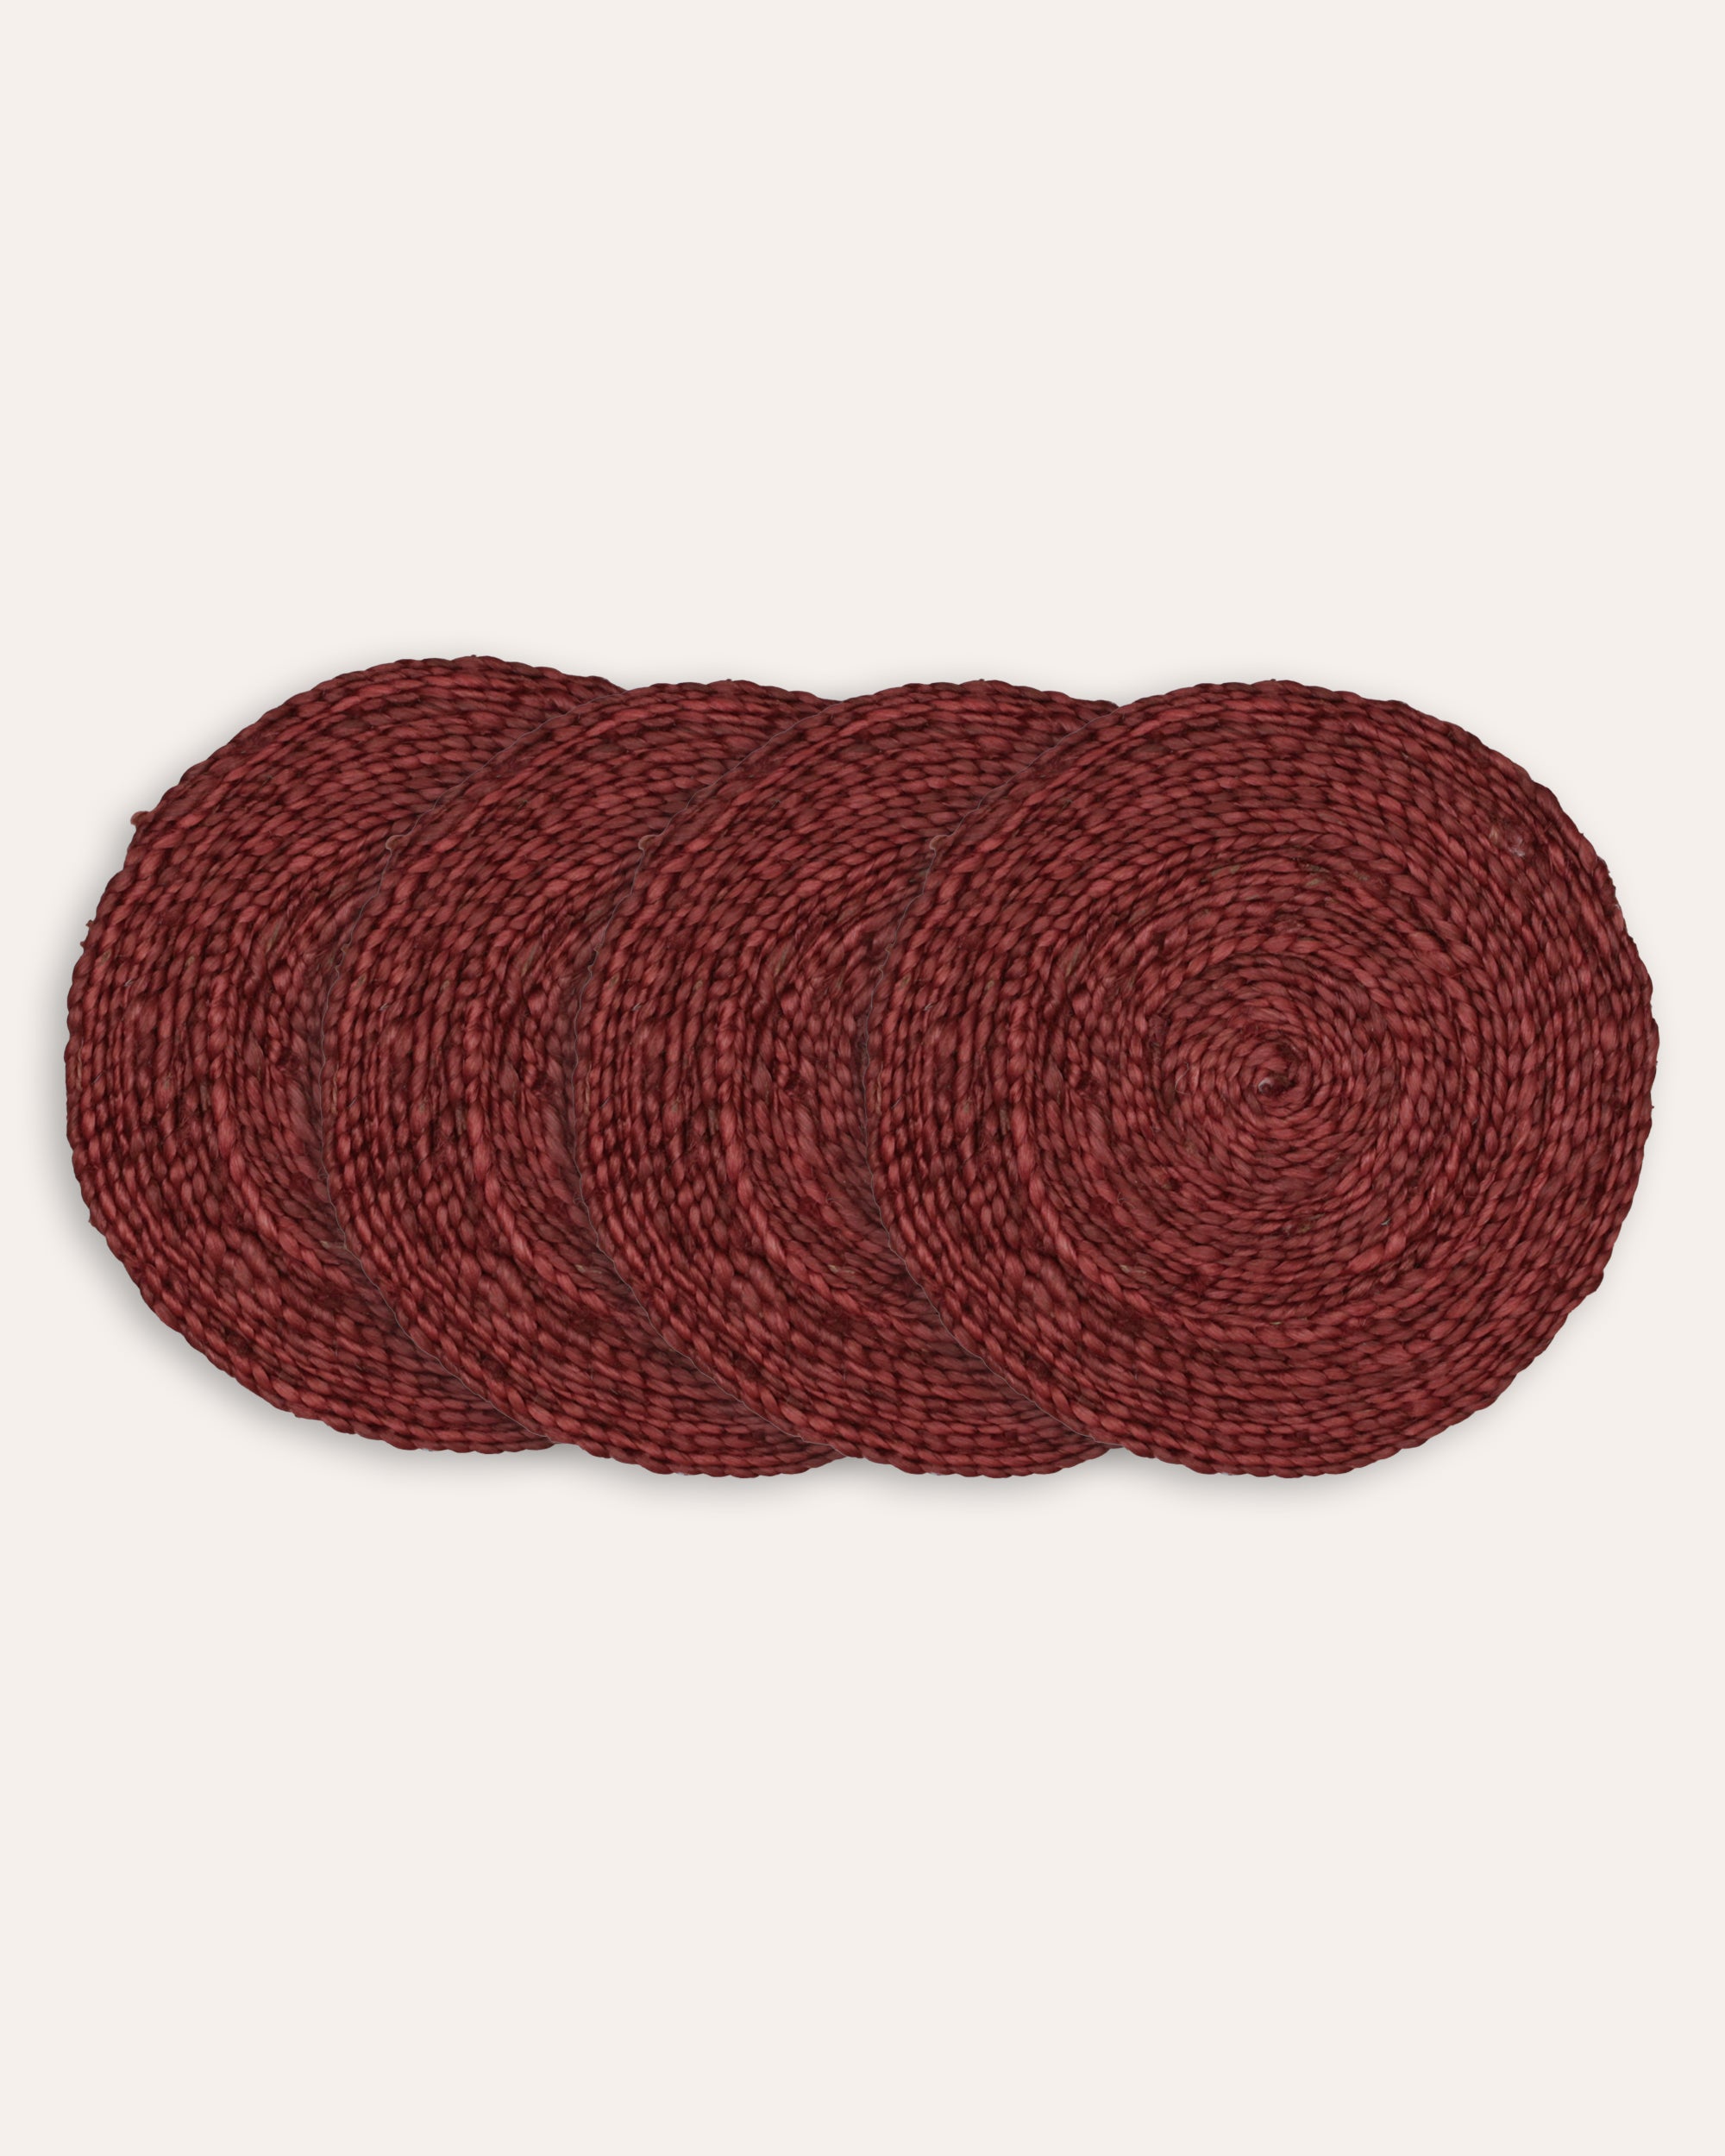 Round Jute Placemats - Carmine Red